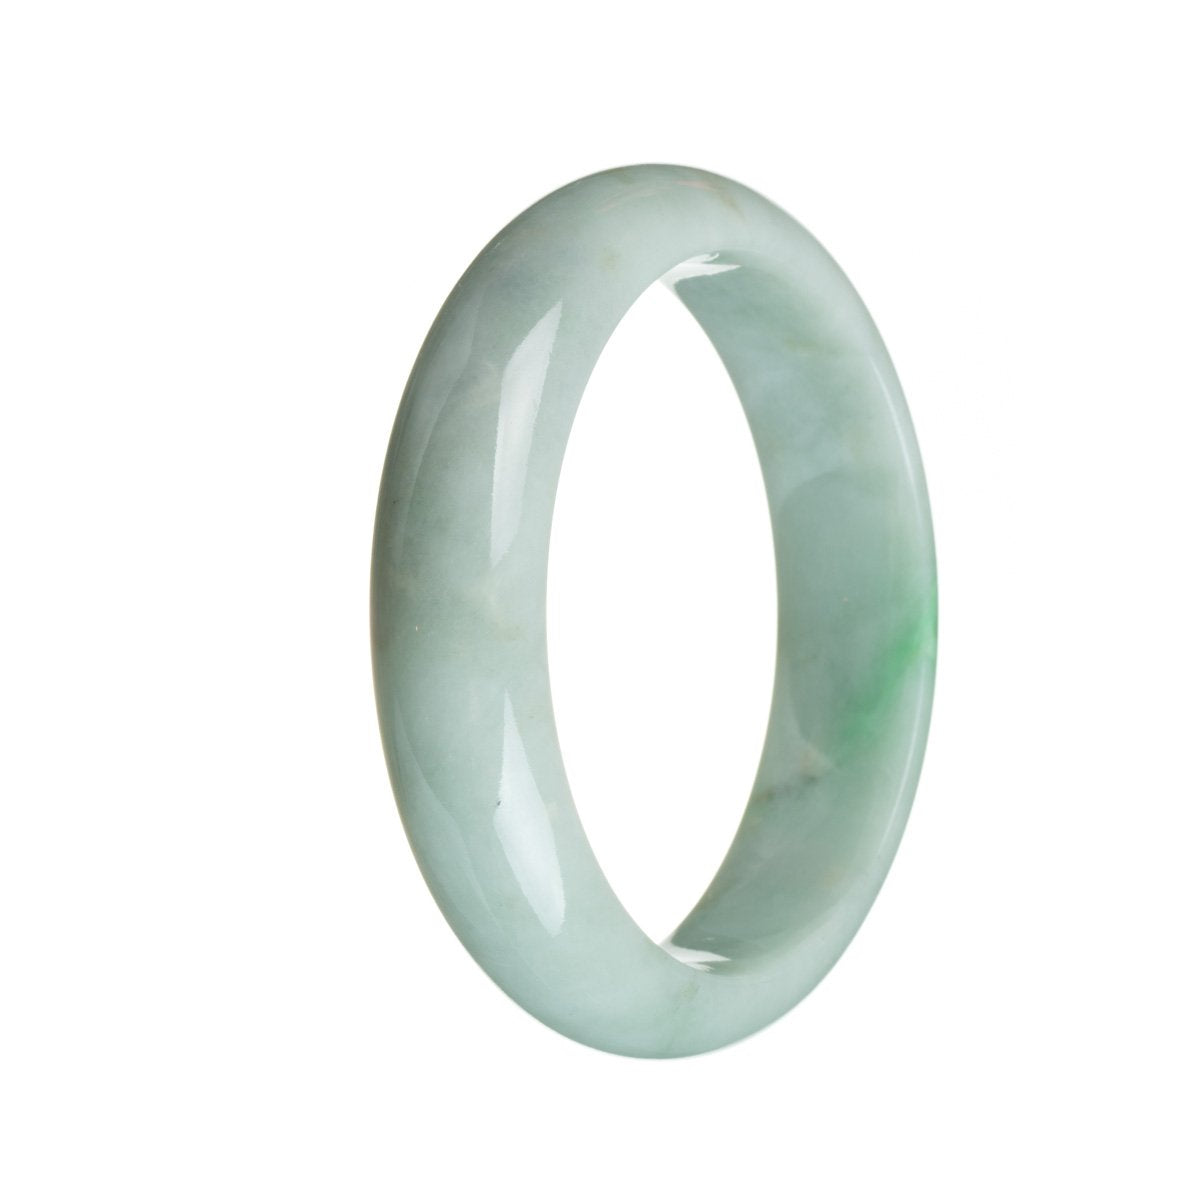 A close-up view of a beautiful green and white Jadeite Jade bangle, half moon shaped, with a diameter of 59mm.